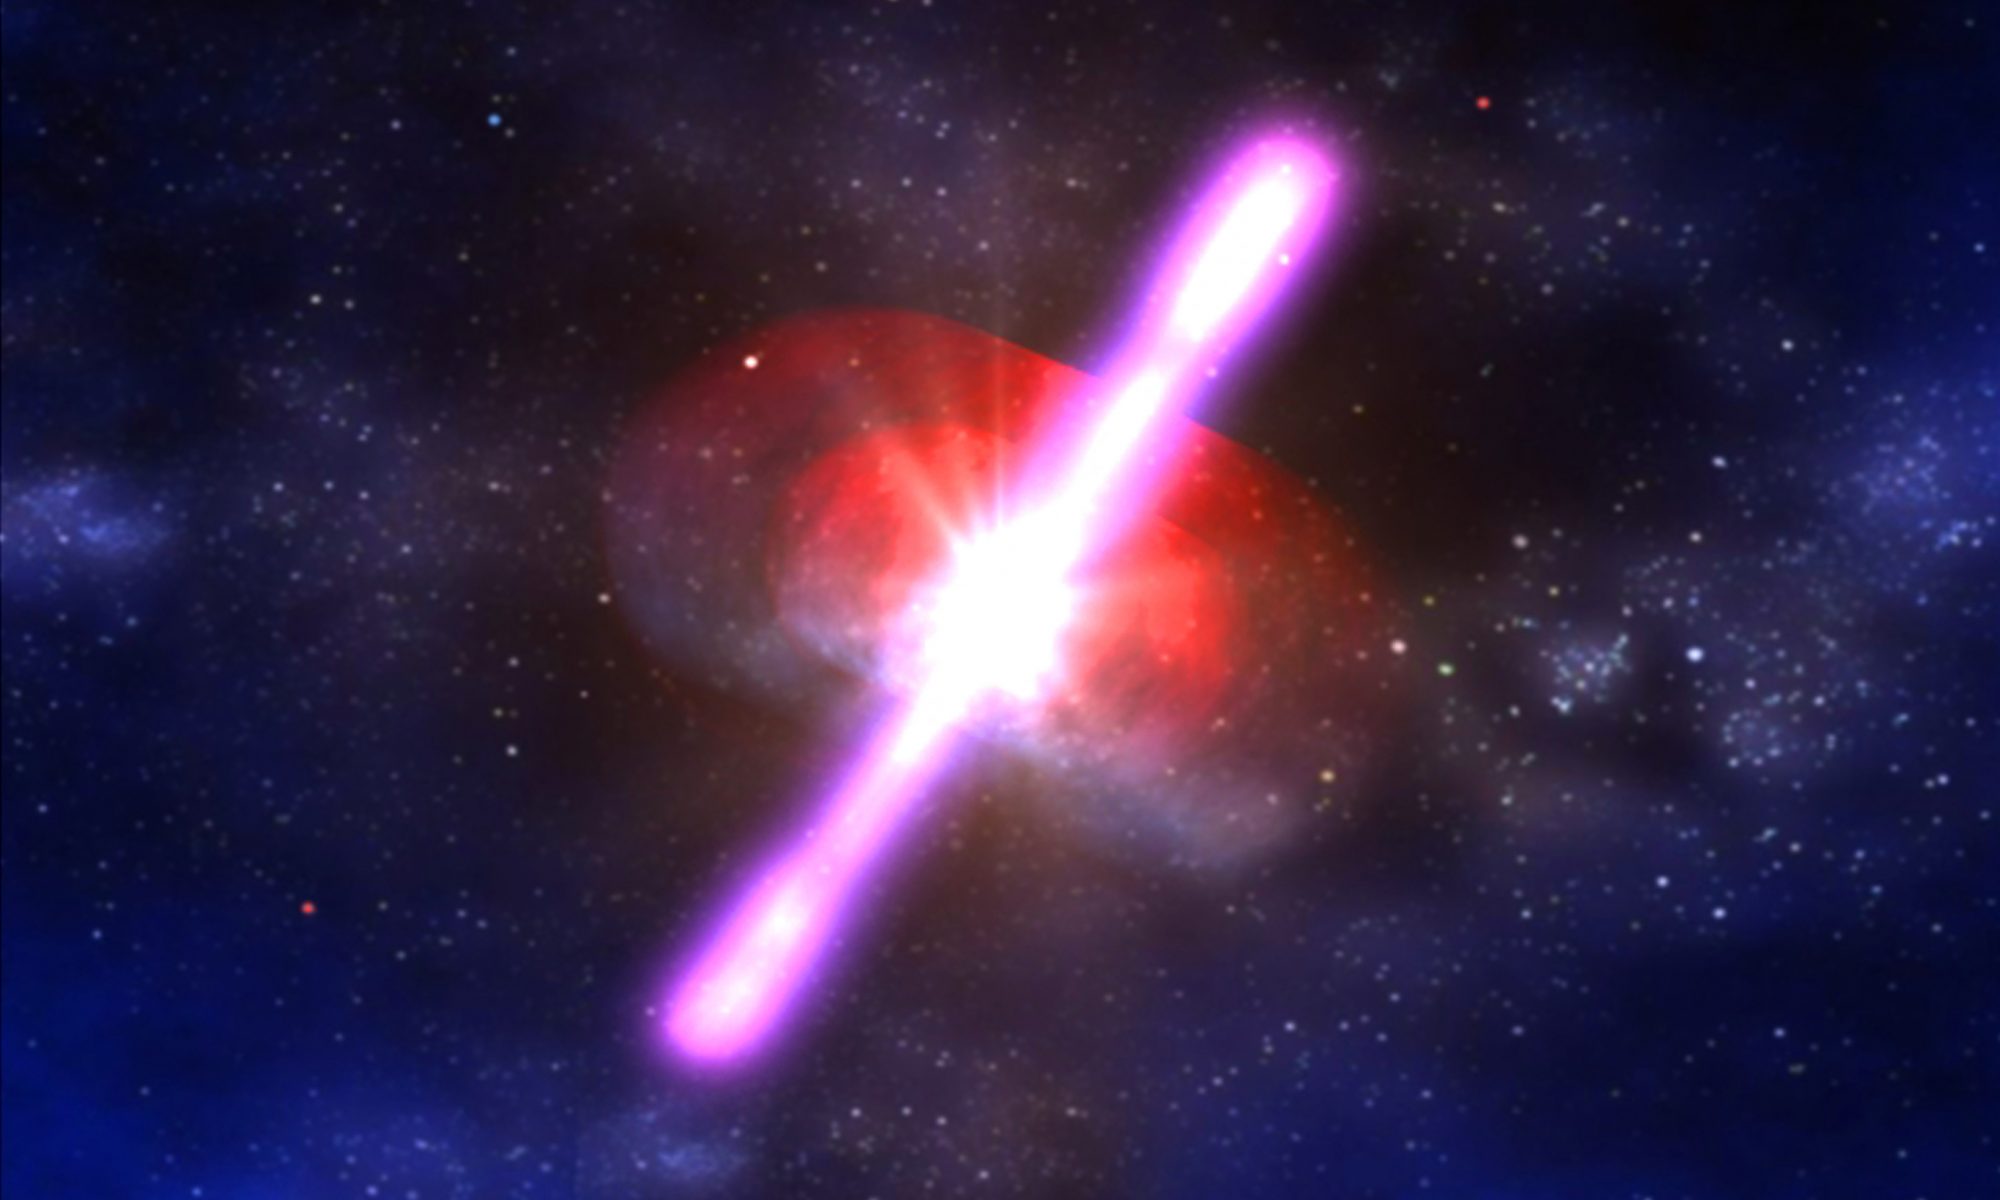 The artist's rendering (left) of GRB 050709 depicts a gamma-ray burst that was discovered on 9 July, 2005 by NASA's High-Energy Transient Explorer. The burst radiated an enormous amount of energy in gamma-rays for half a second, then faded away. Three days later, Chandra's detection of the X-ray afterglow (inset) established its position with high accuracy. A Hubble Space Telescope image showed that the burst occurred in the outskirts of a spiral galaxy. This location is outside the star-forming regions of the galaxy and evidence that the burst was not produced by the explosion of an extremely massive star. The most likely explanation for the burst is that it was produced by a collision of two neutron stars, or a neutron star and a black hole.